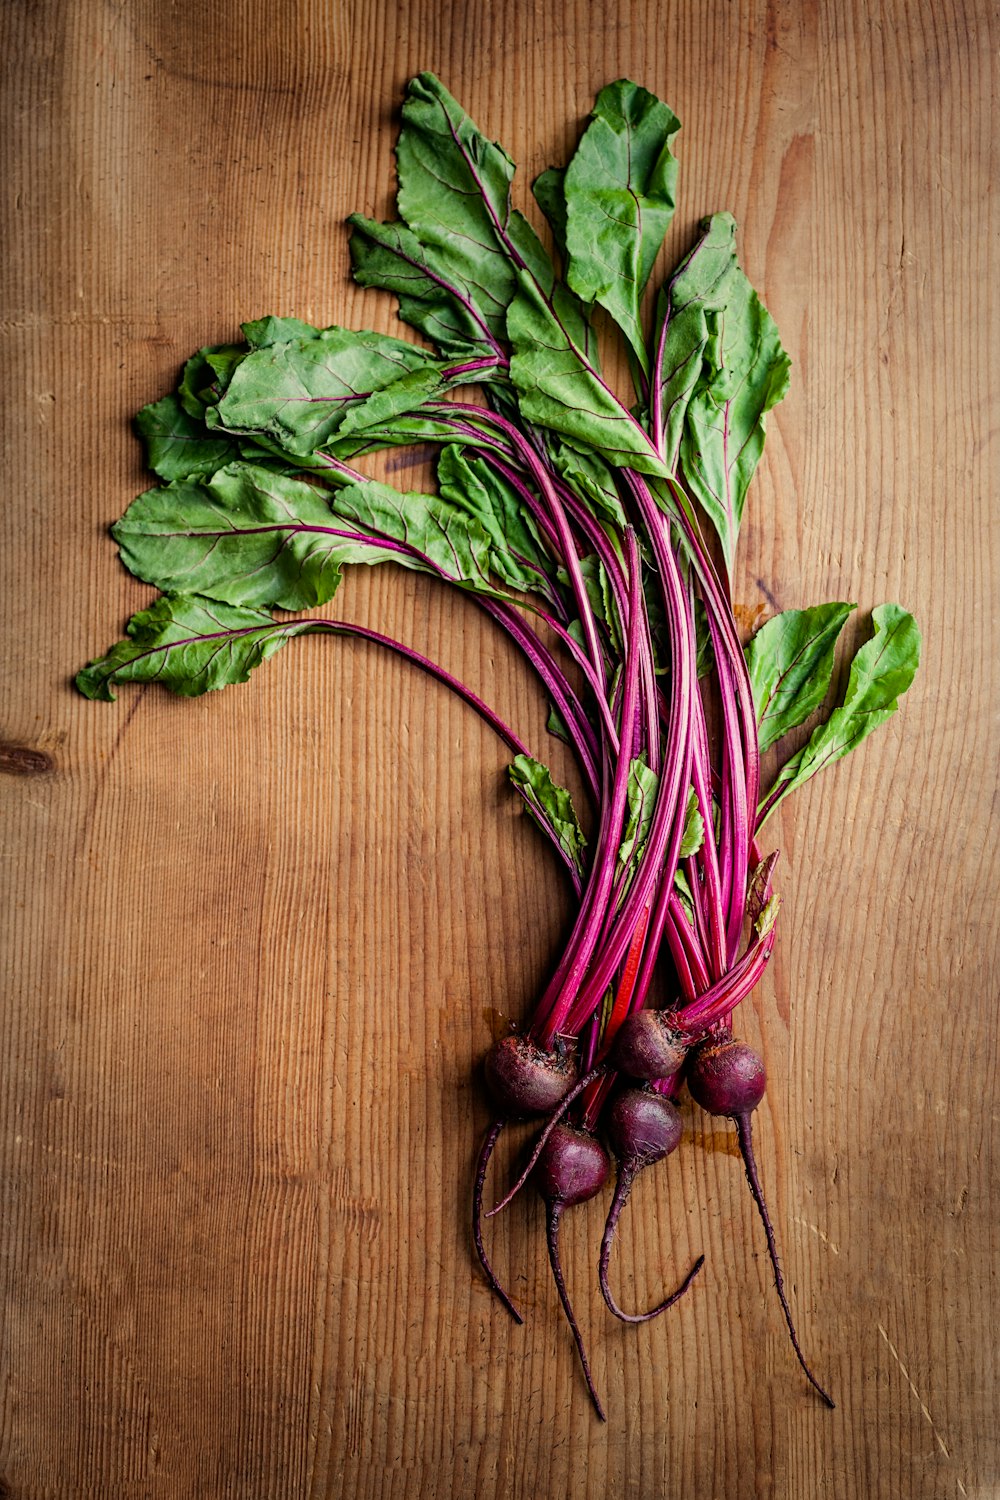 purple and green vegetables on brown surface